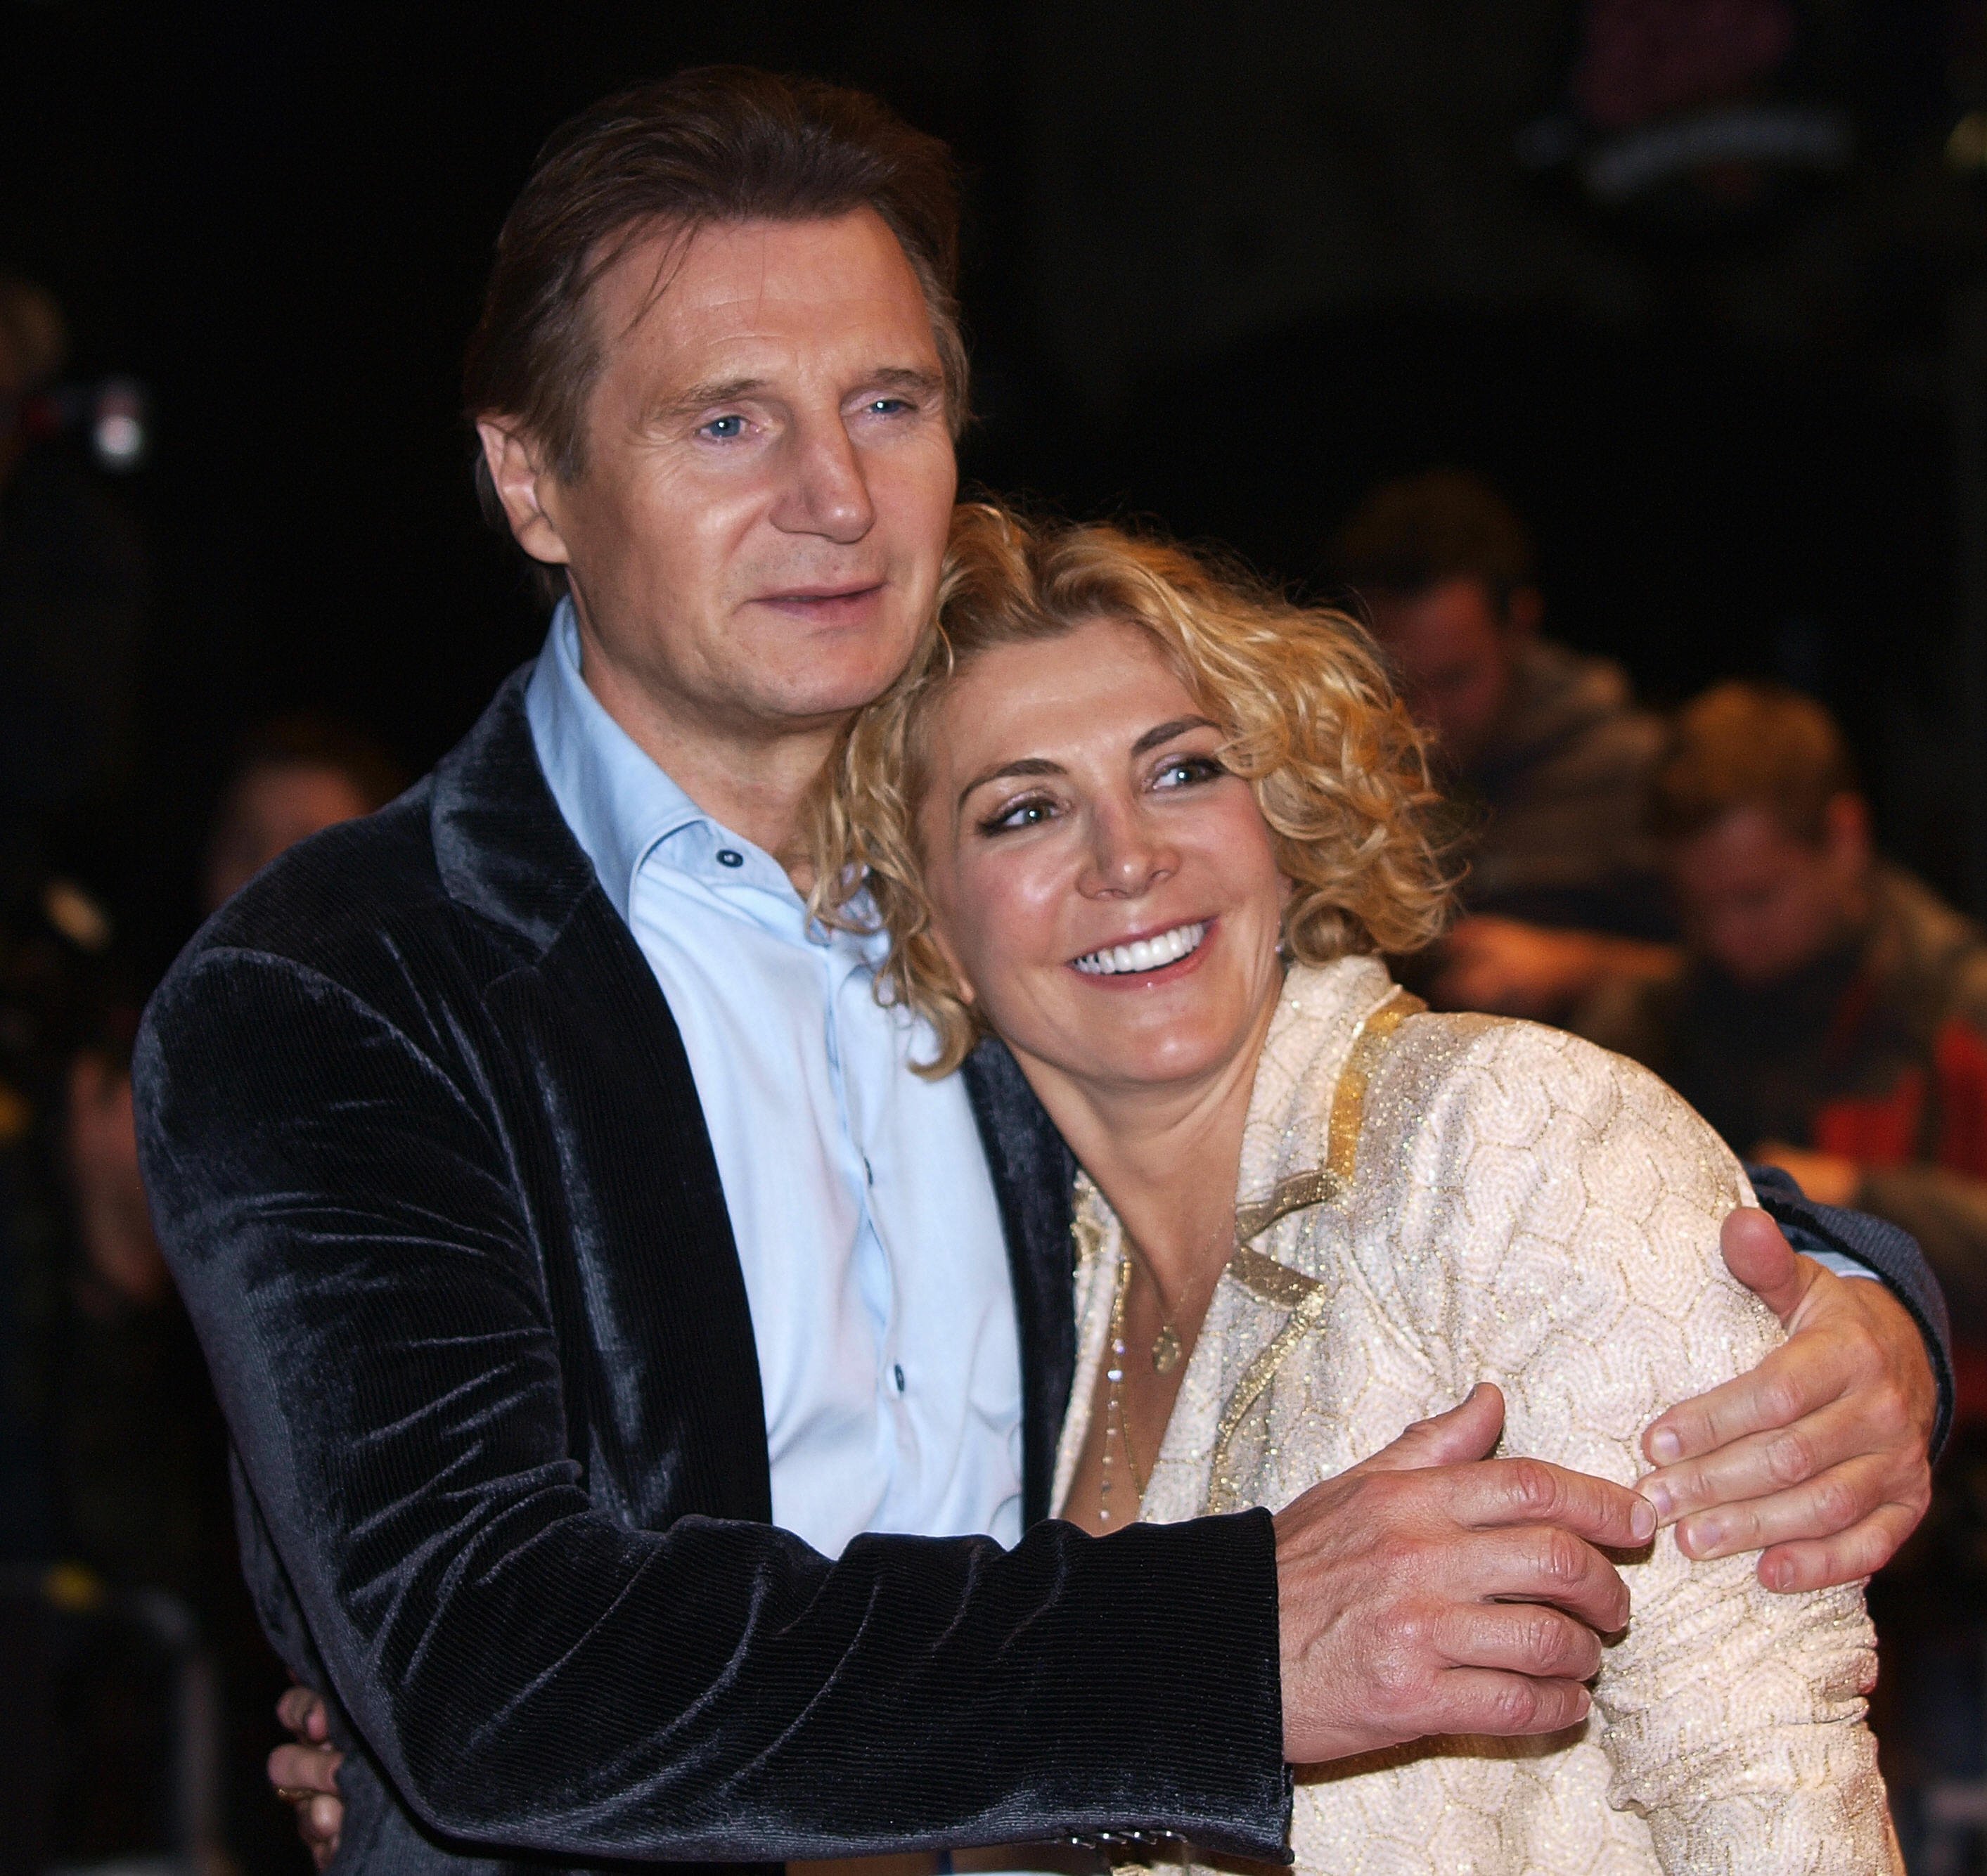 Liam Neeson and Natasha Richardson in London's Leicester Square, 2008 | Source: Getty Images